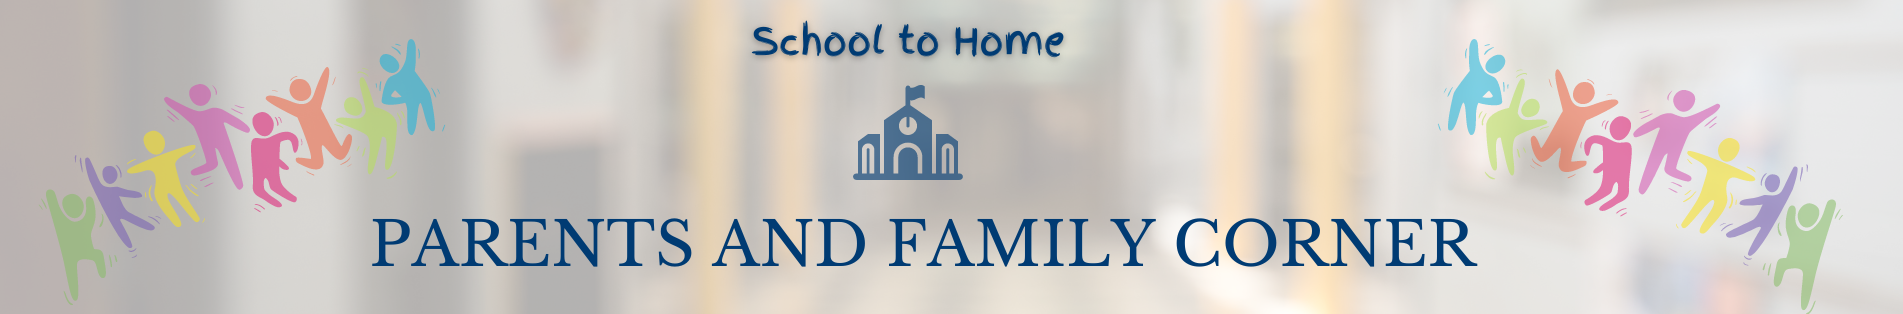 parents and family corner banner with clipart school house and colorful people